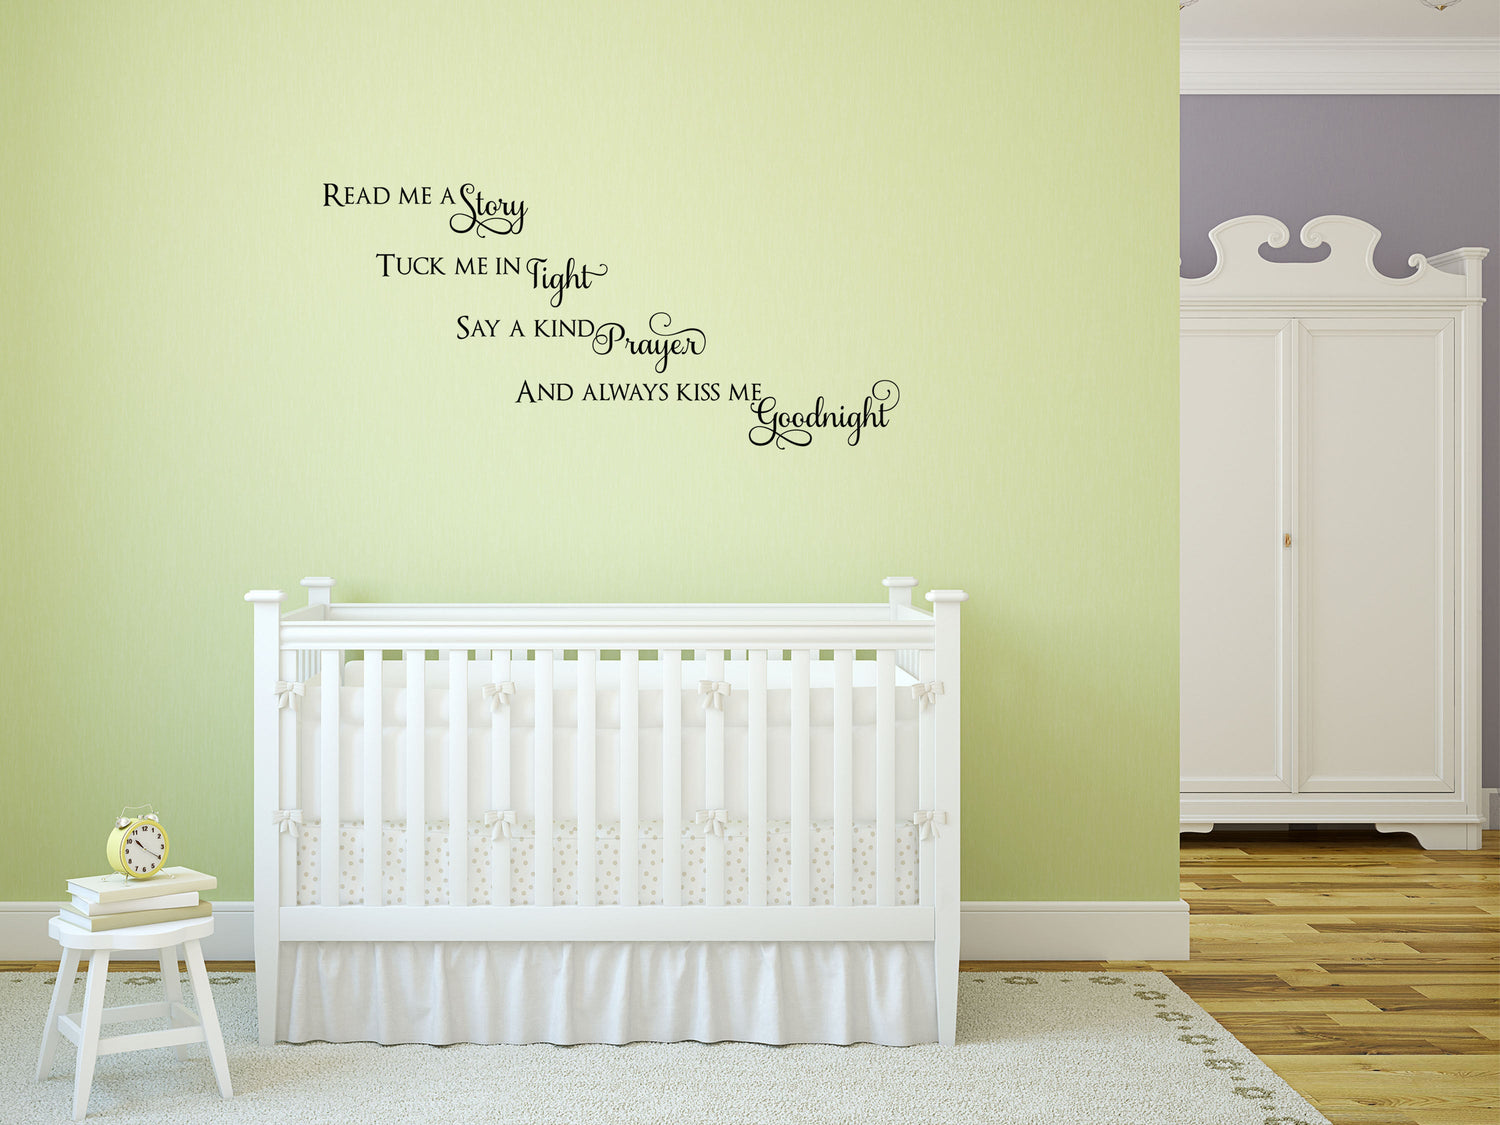 Kiss Me Goodnight - Inspirational Wall Decals Vinyl Wall Decal Inspirational Wall Signs 